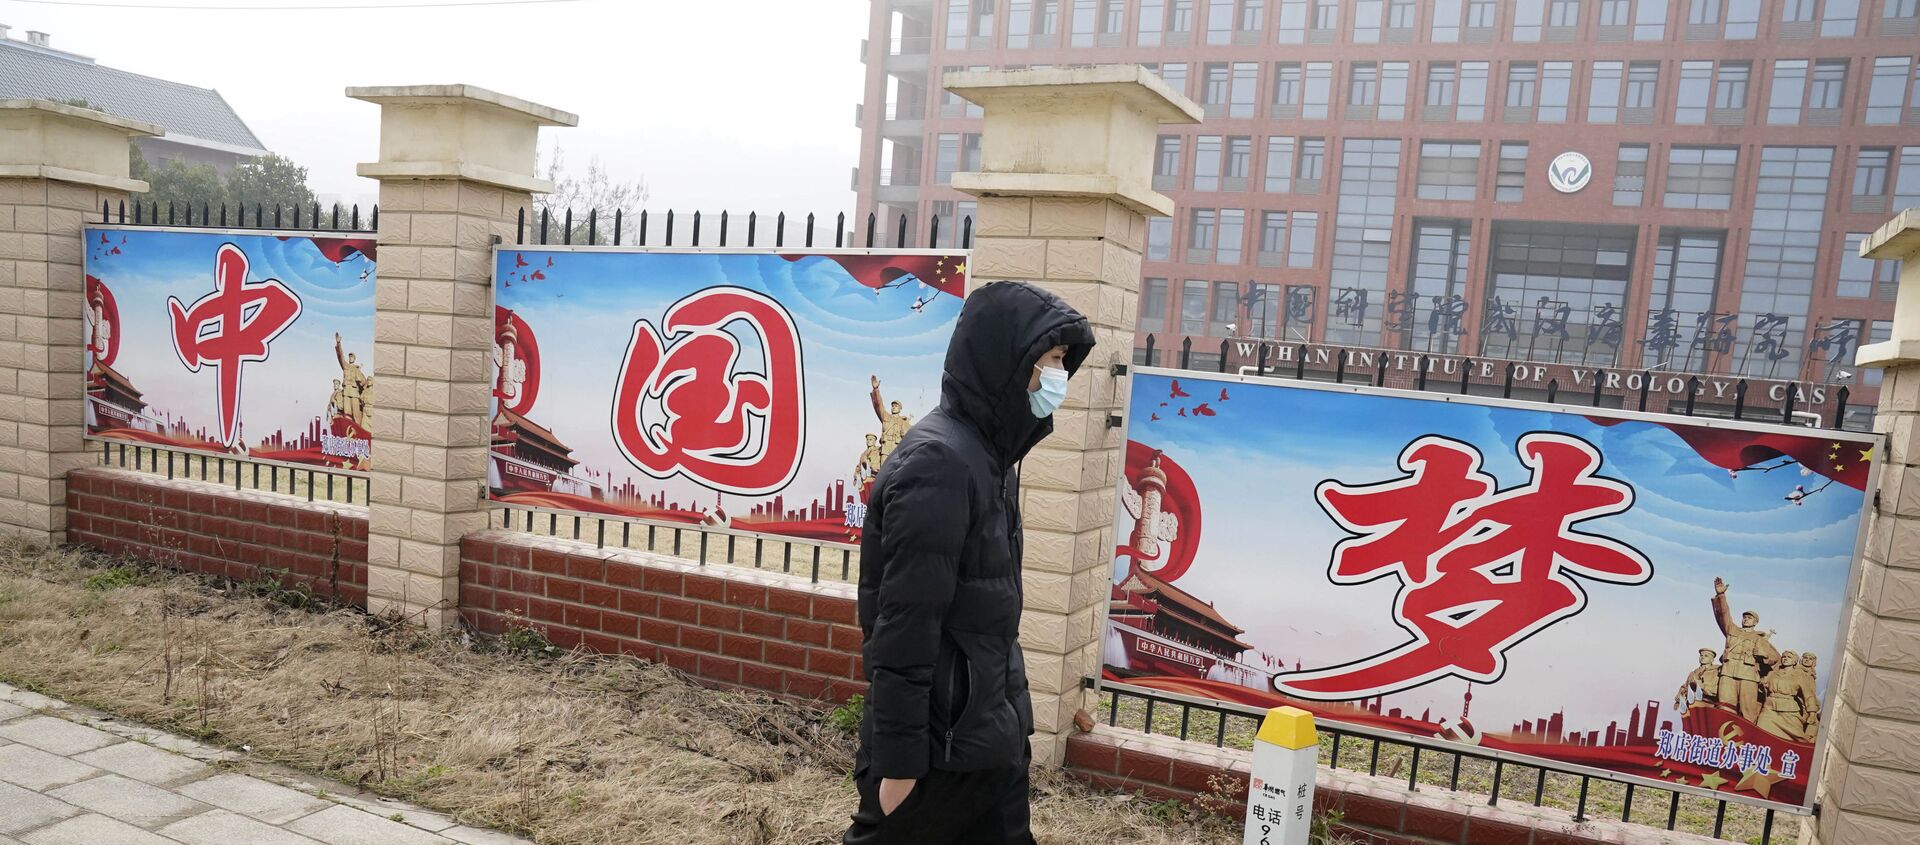 A man passes by the words China Dream outside the entrance to the Wuhan Institute of Virology during a visit by a World Health Organization team in Wuhan in China's Hubei province on Wednesday, Feb. 3, 2021 - Sputnik International, 1920